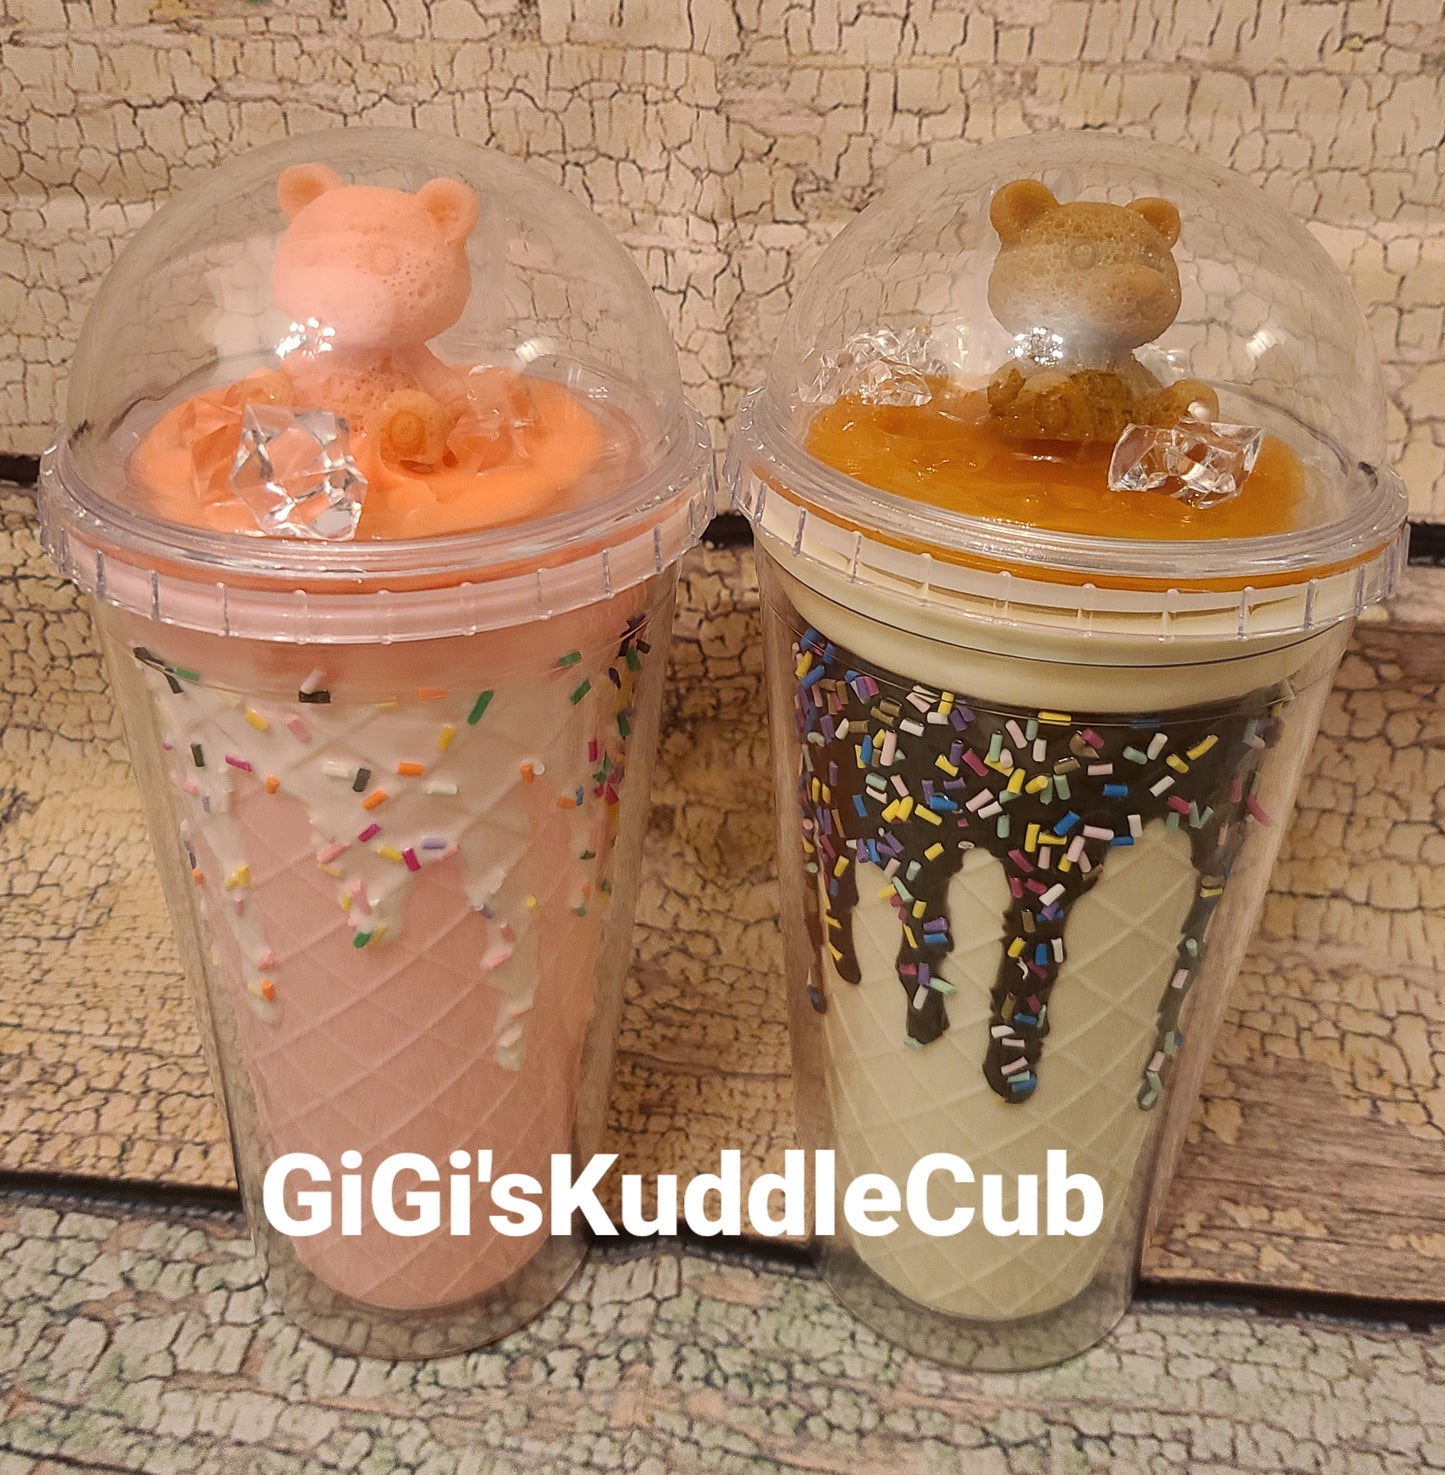 Double Walled Dome Lid 3D Bear Ice Cubes Acrylic Ice Cream Drips Sprinkle Tumbler Cup With Straw BPA Free 16oz